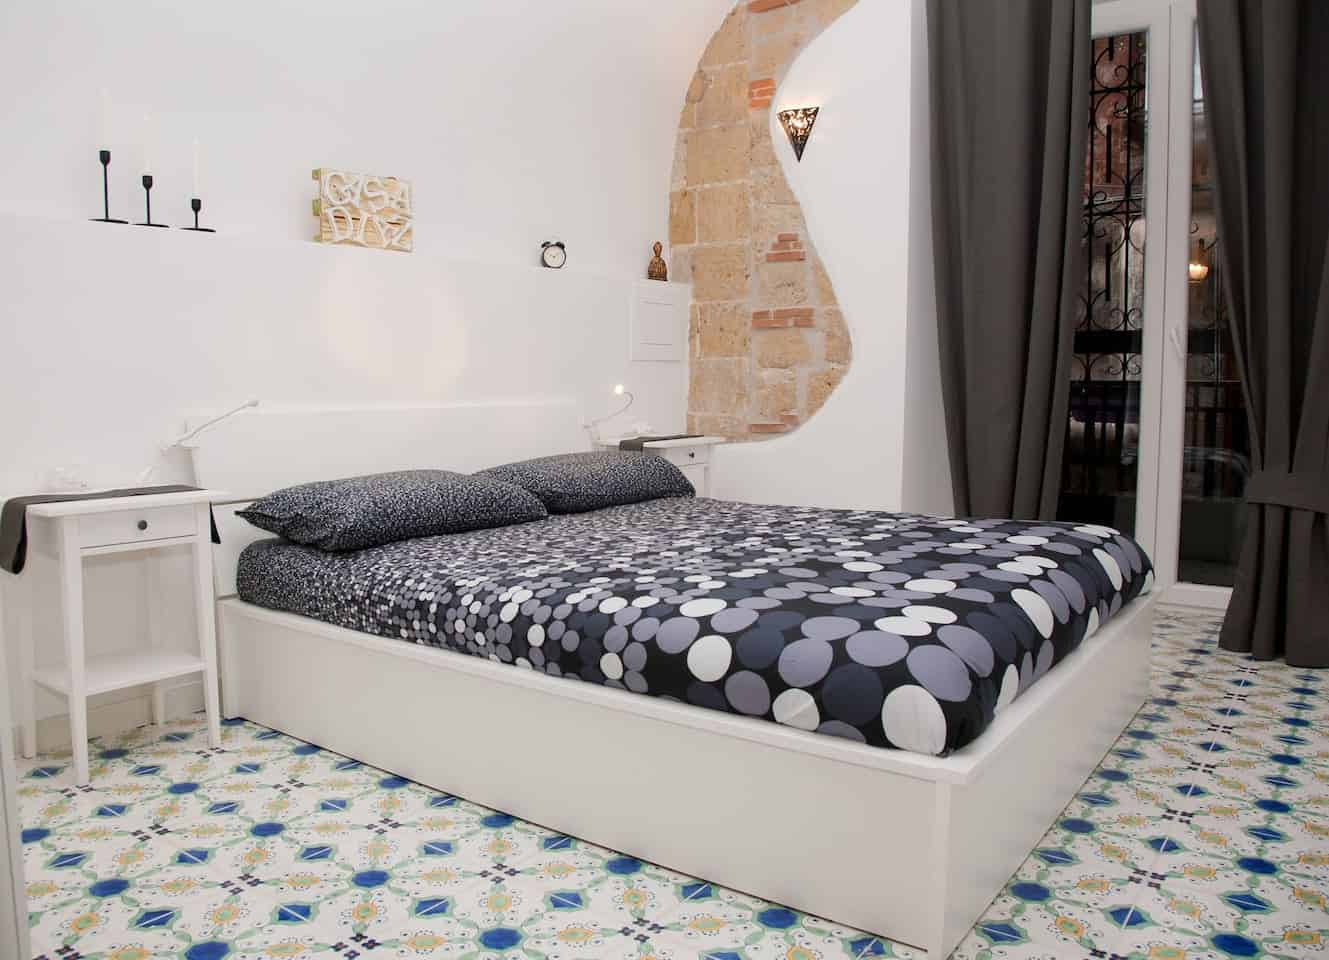 Image of Airbnb rental in Naples, Italy